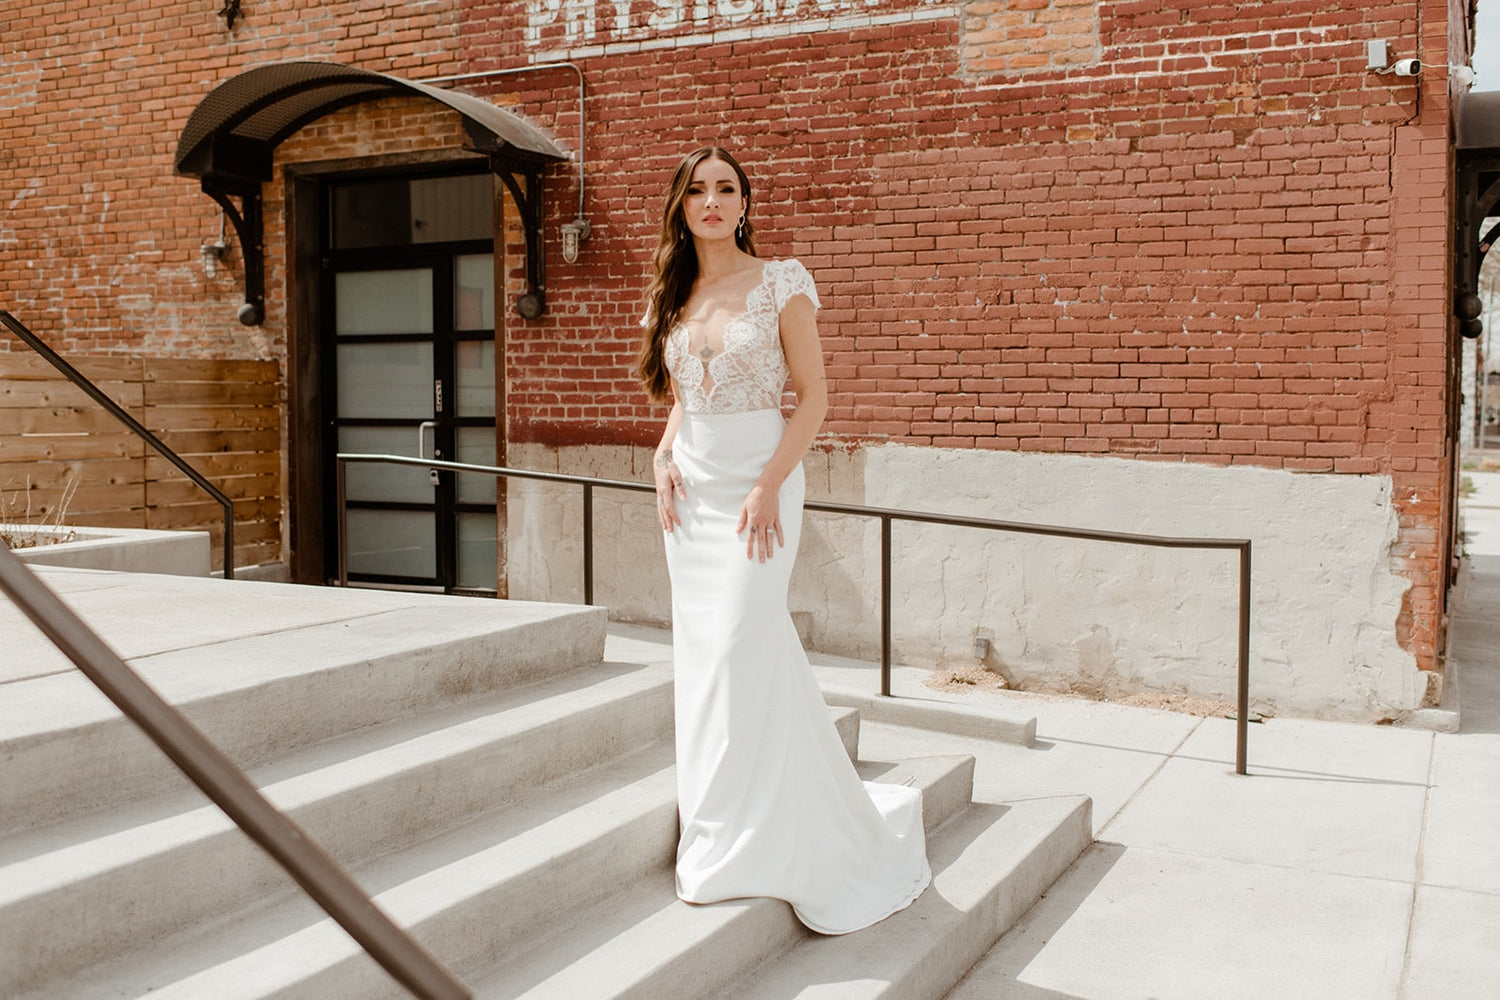 Top Questions for Wedding Dress Shopping in Denver